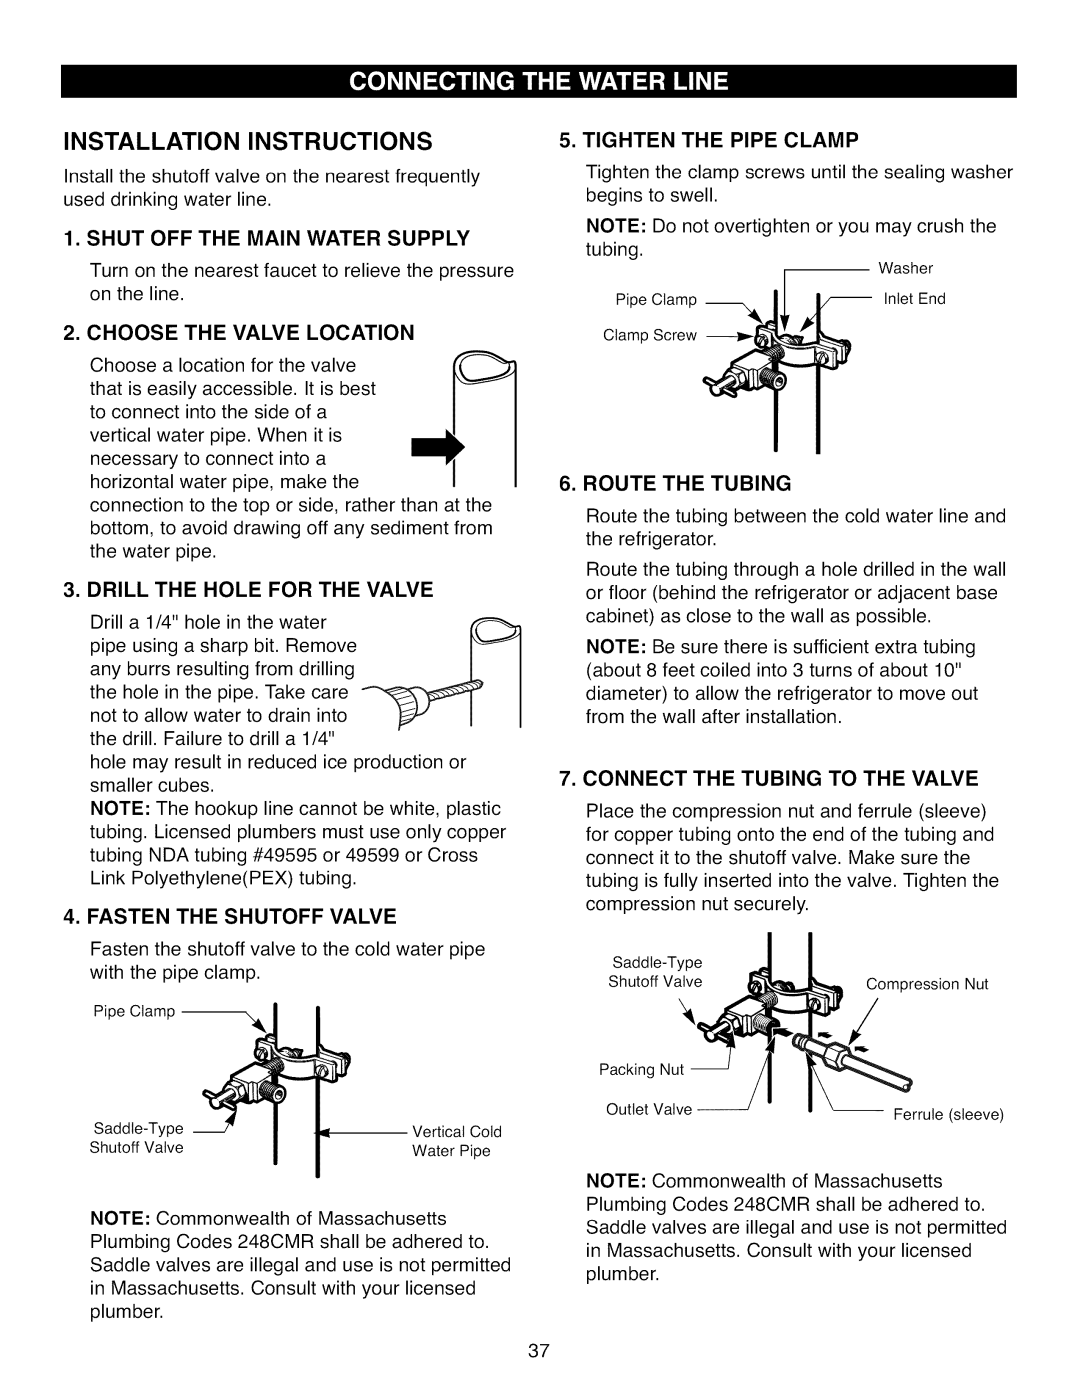 Kenmore 795.7105 manual Installation Instructions, Choose The Valve Location, Route, Drill The Hole For The Valve 